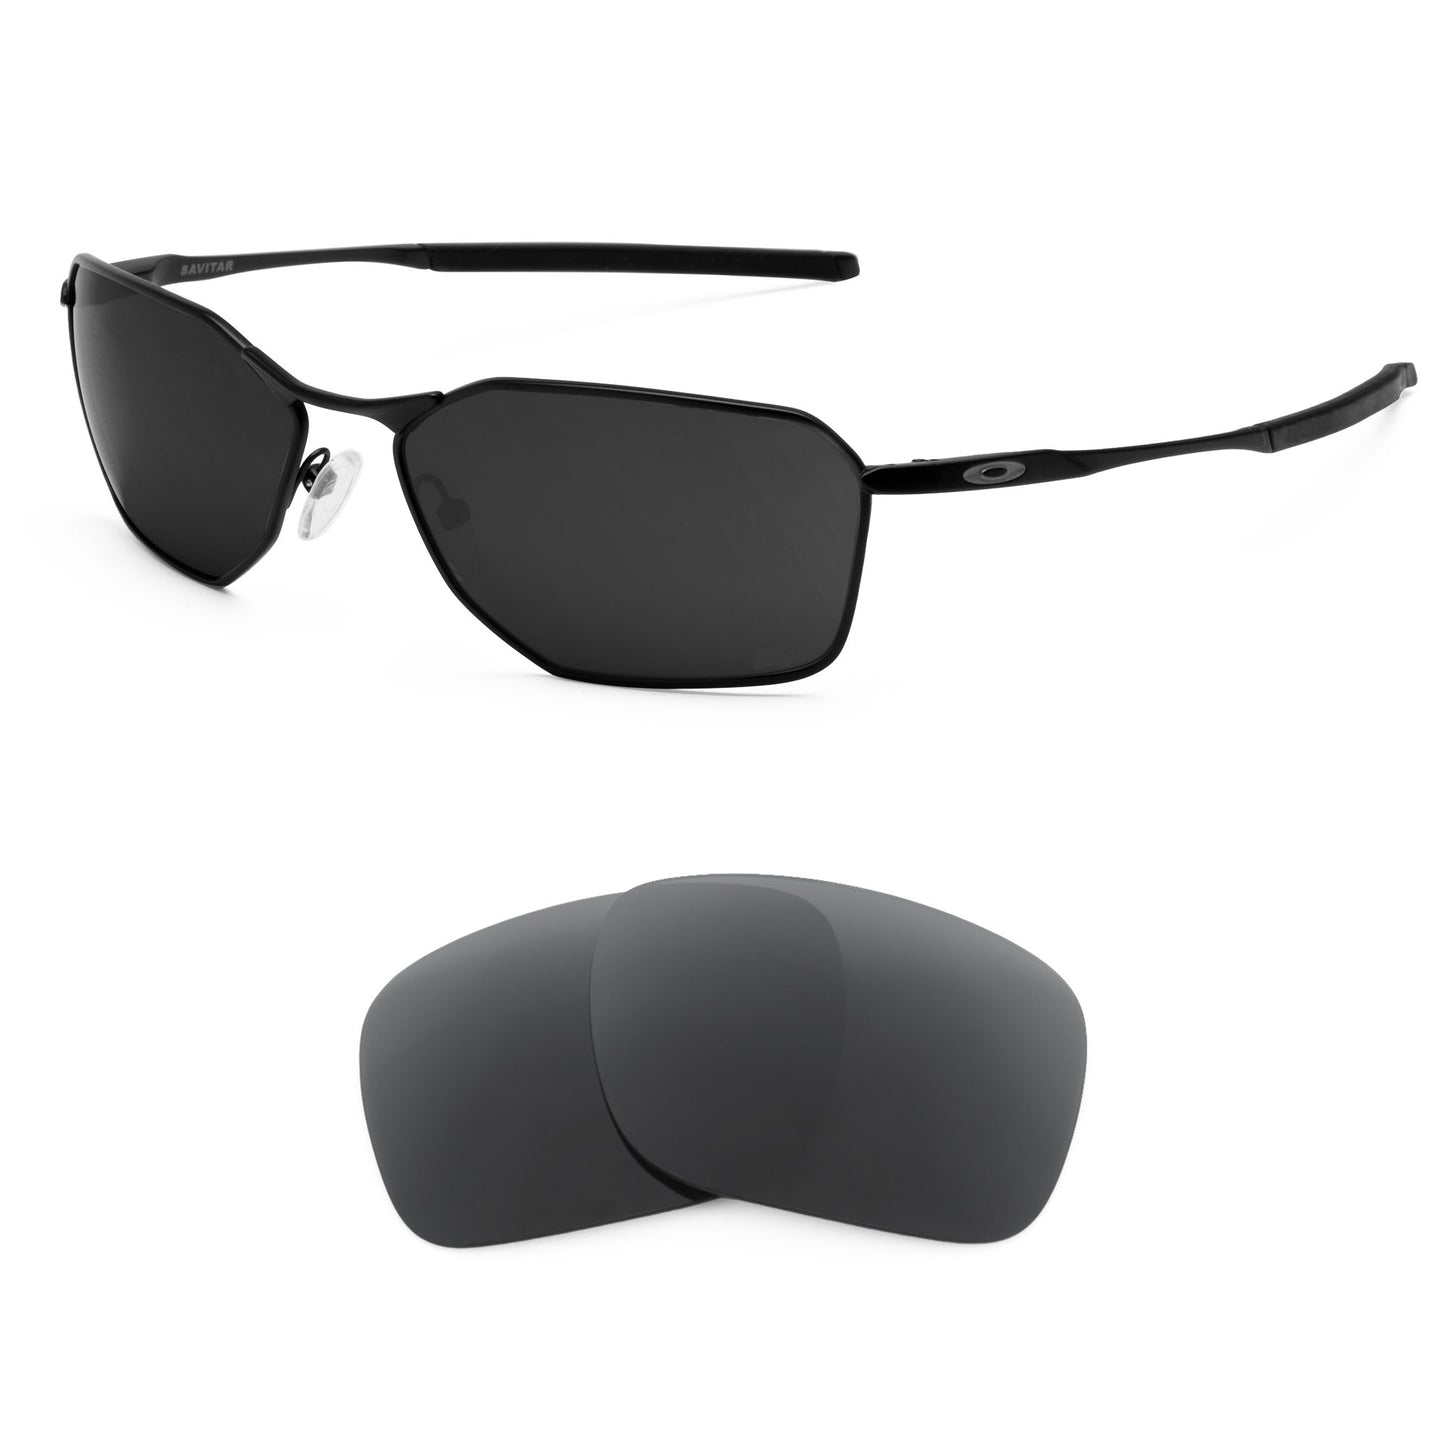 Oakley Savitar sunglasses with replacement lenses